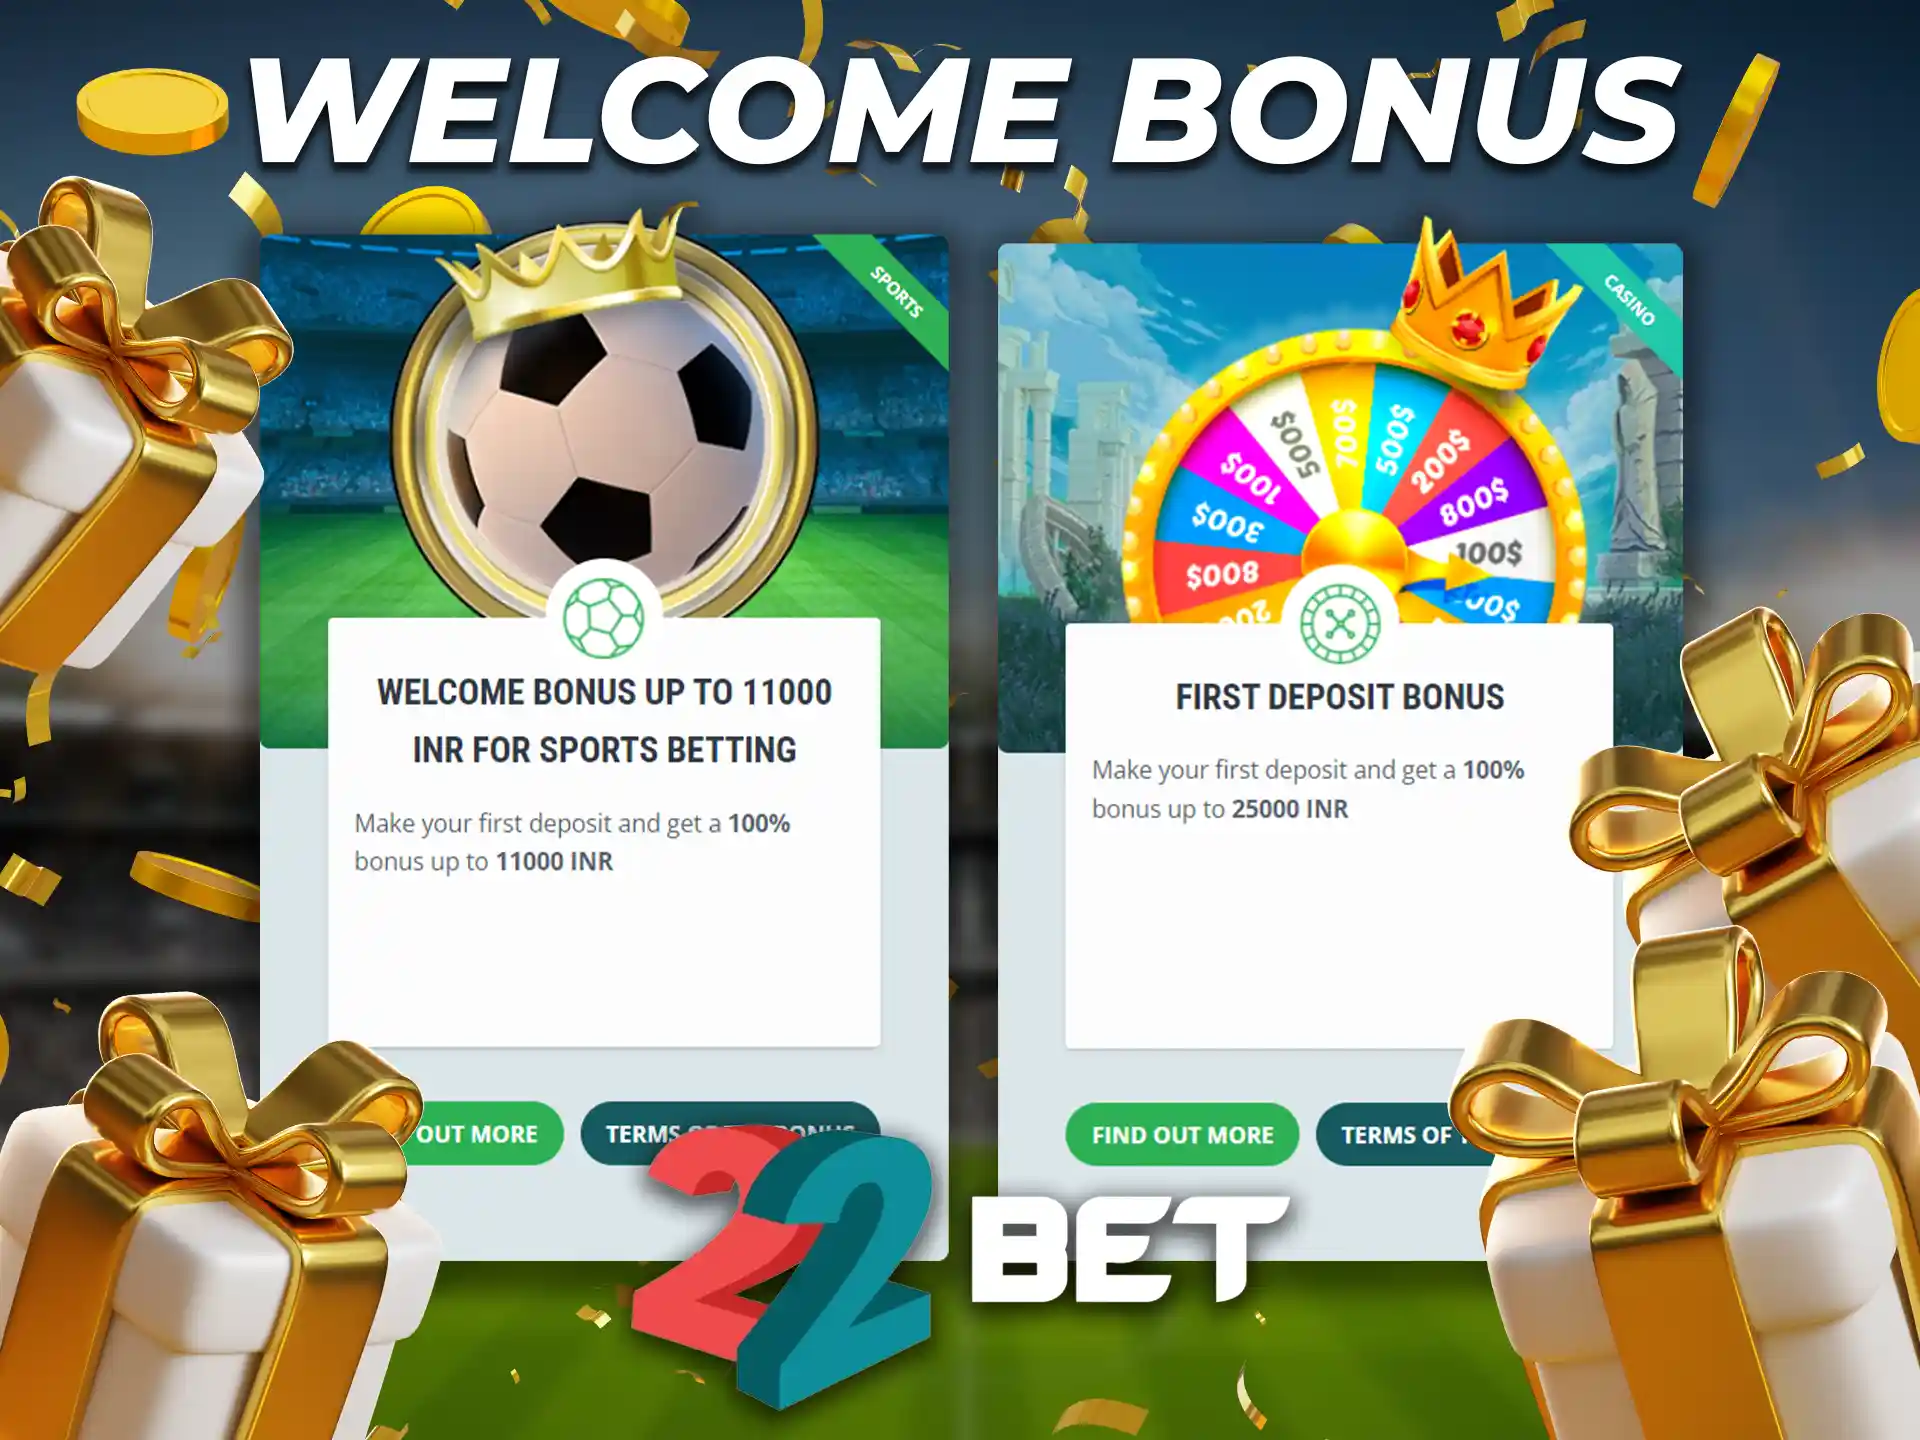 The welcome bonus is available after registering on the 22Bet website.